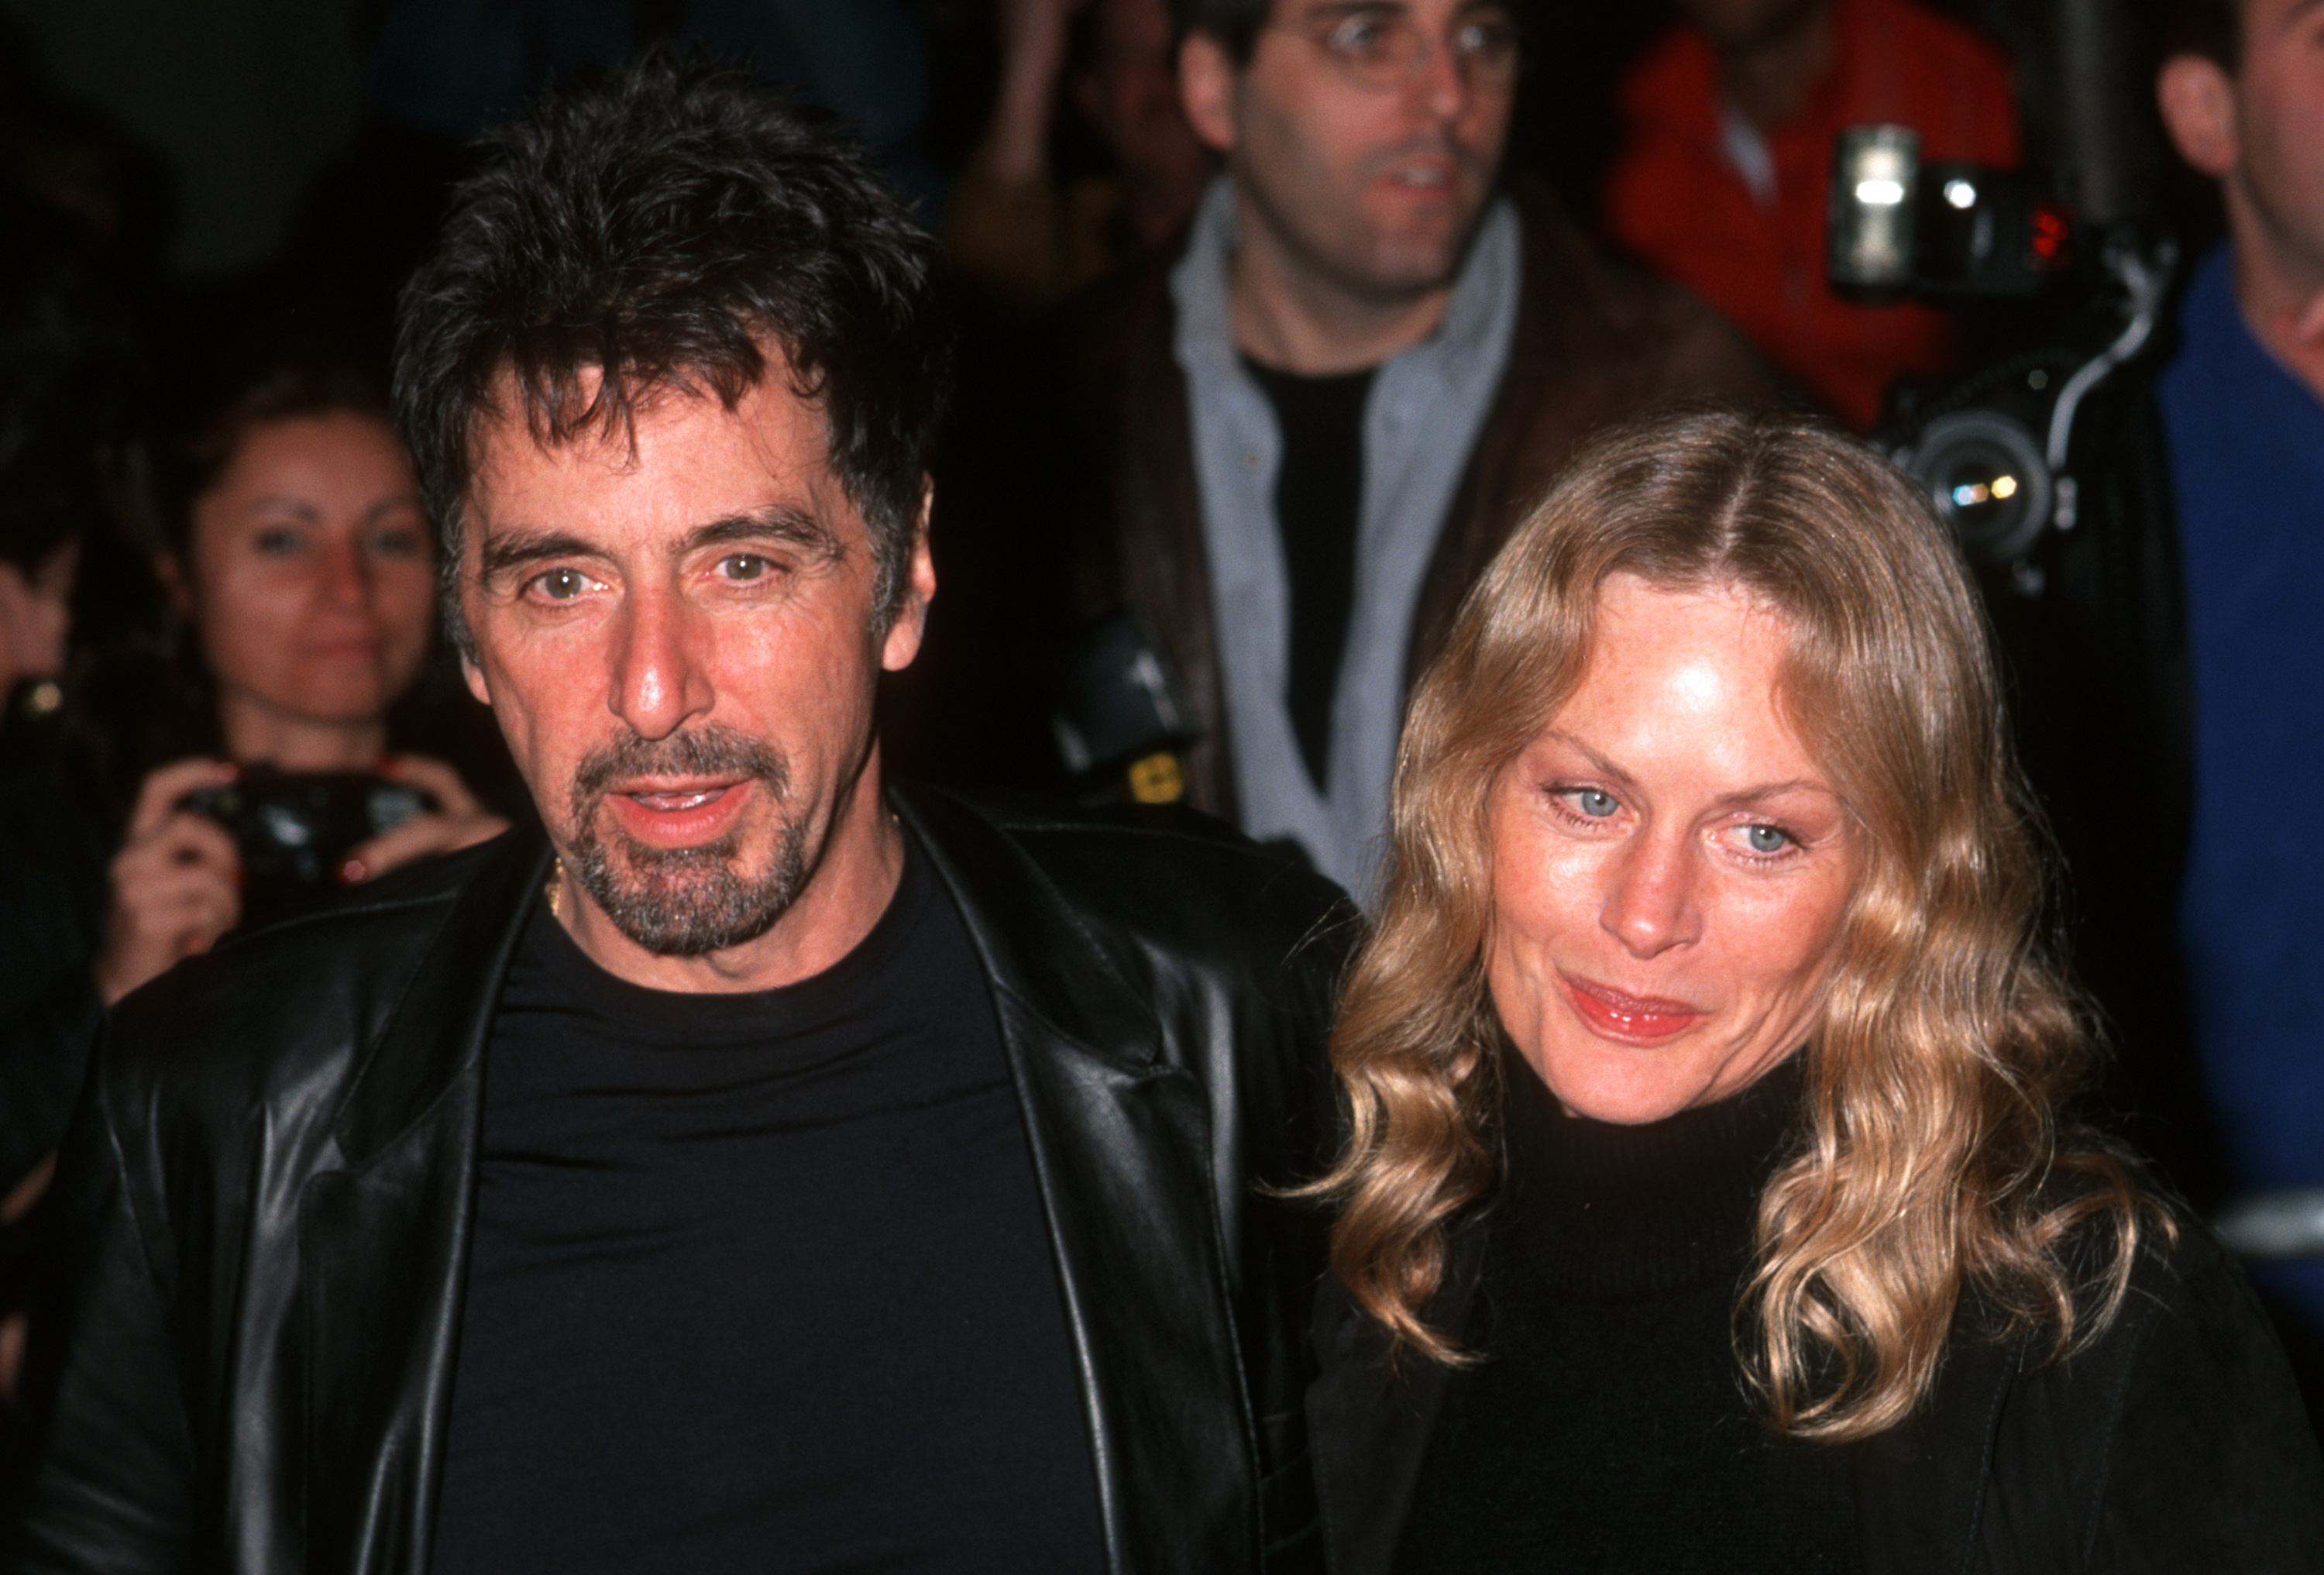 Al Pacino and Beverly D'Angelo during the premiere of "The Insider" in New York City on November 1, 1999 | Source: Getty Images